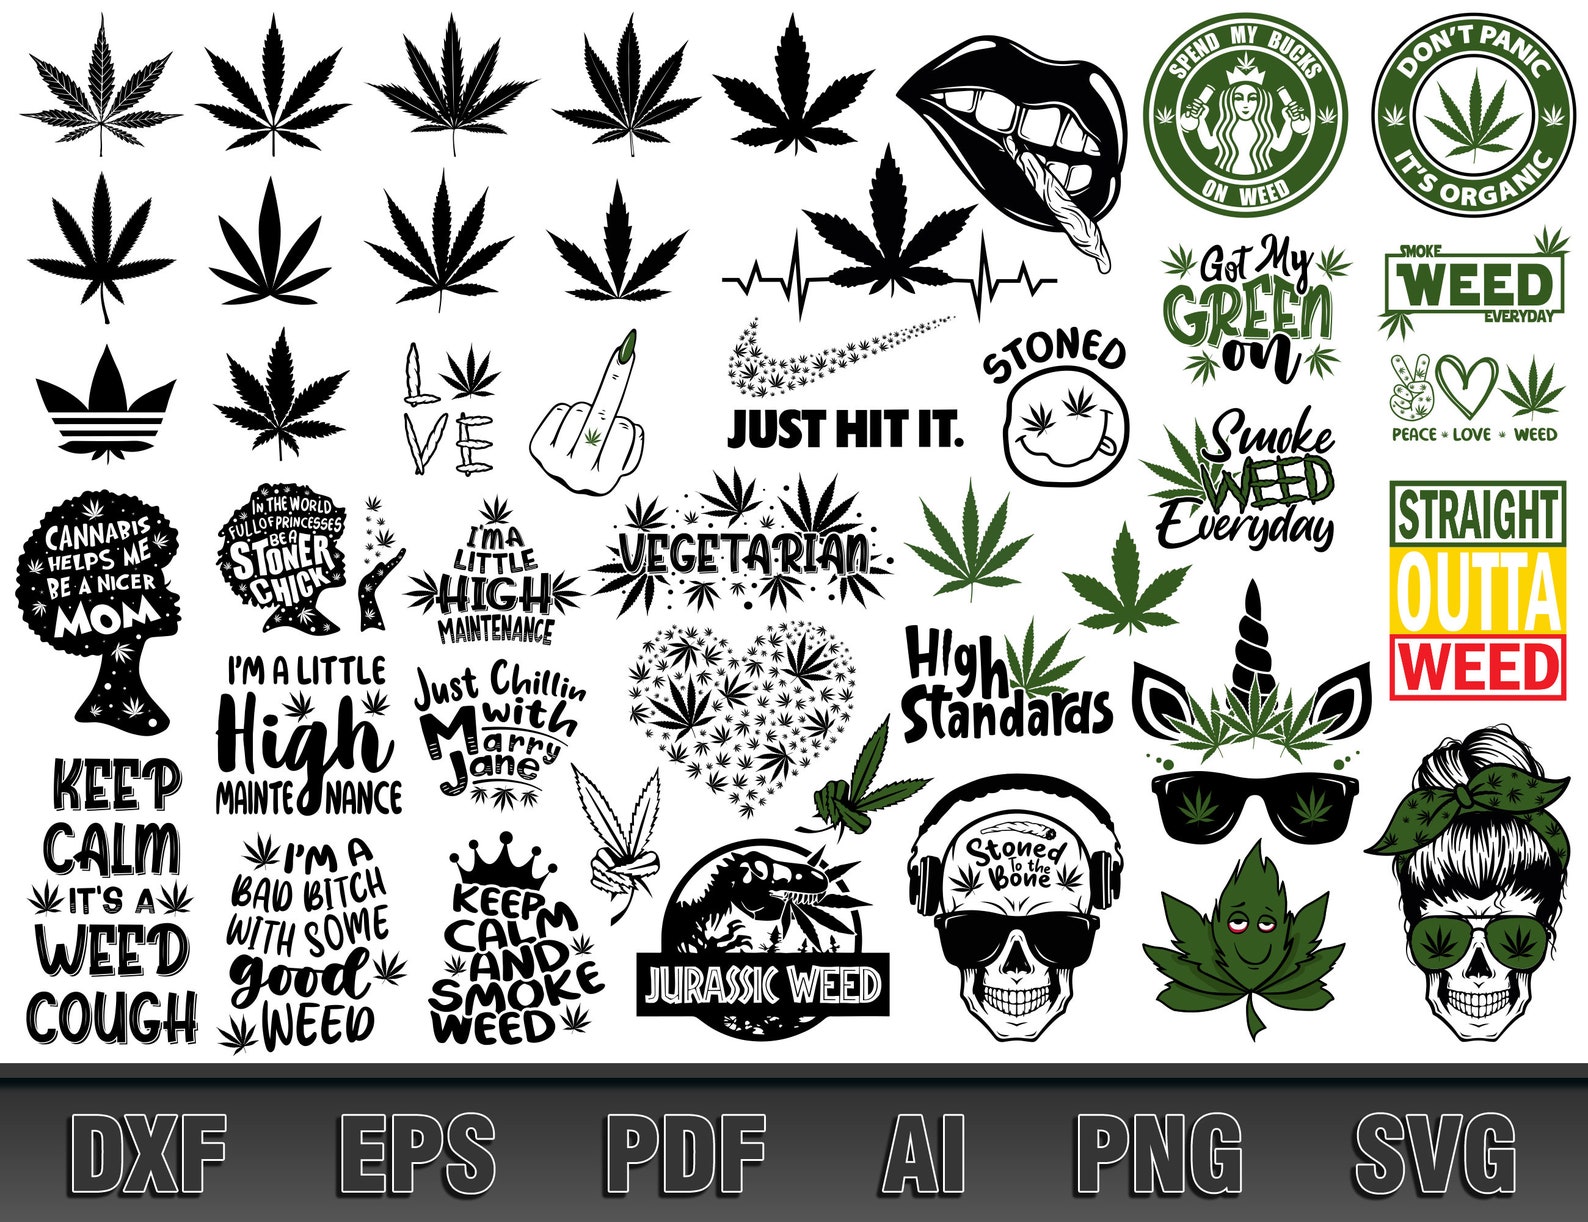 Diverse of cannabis.